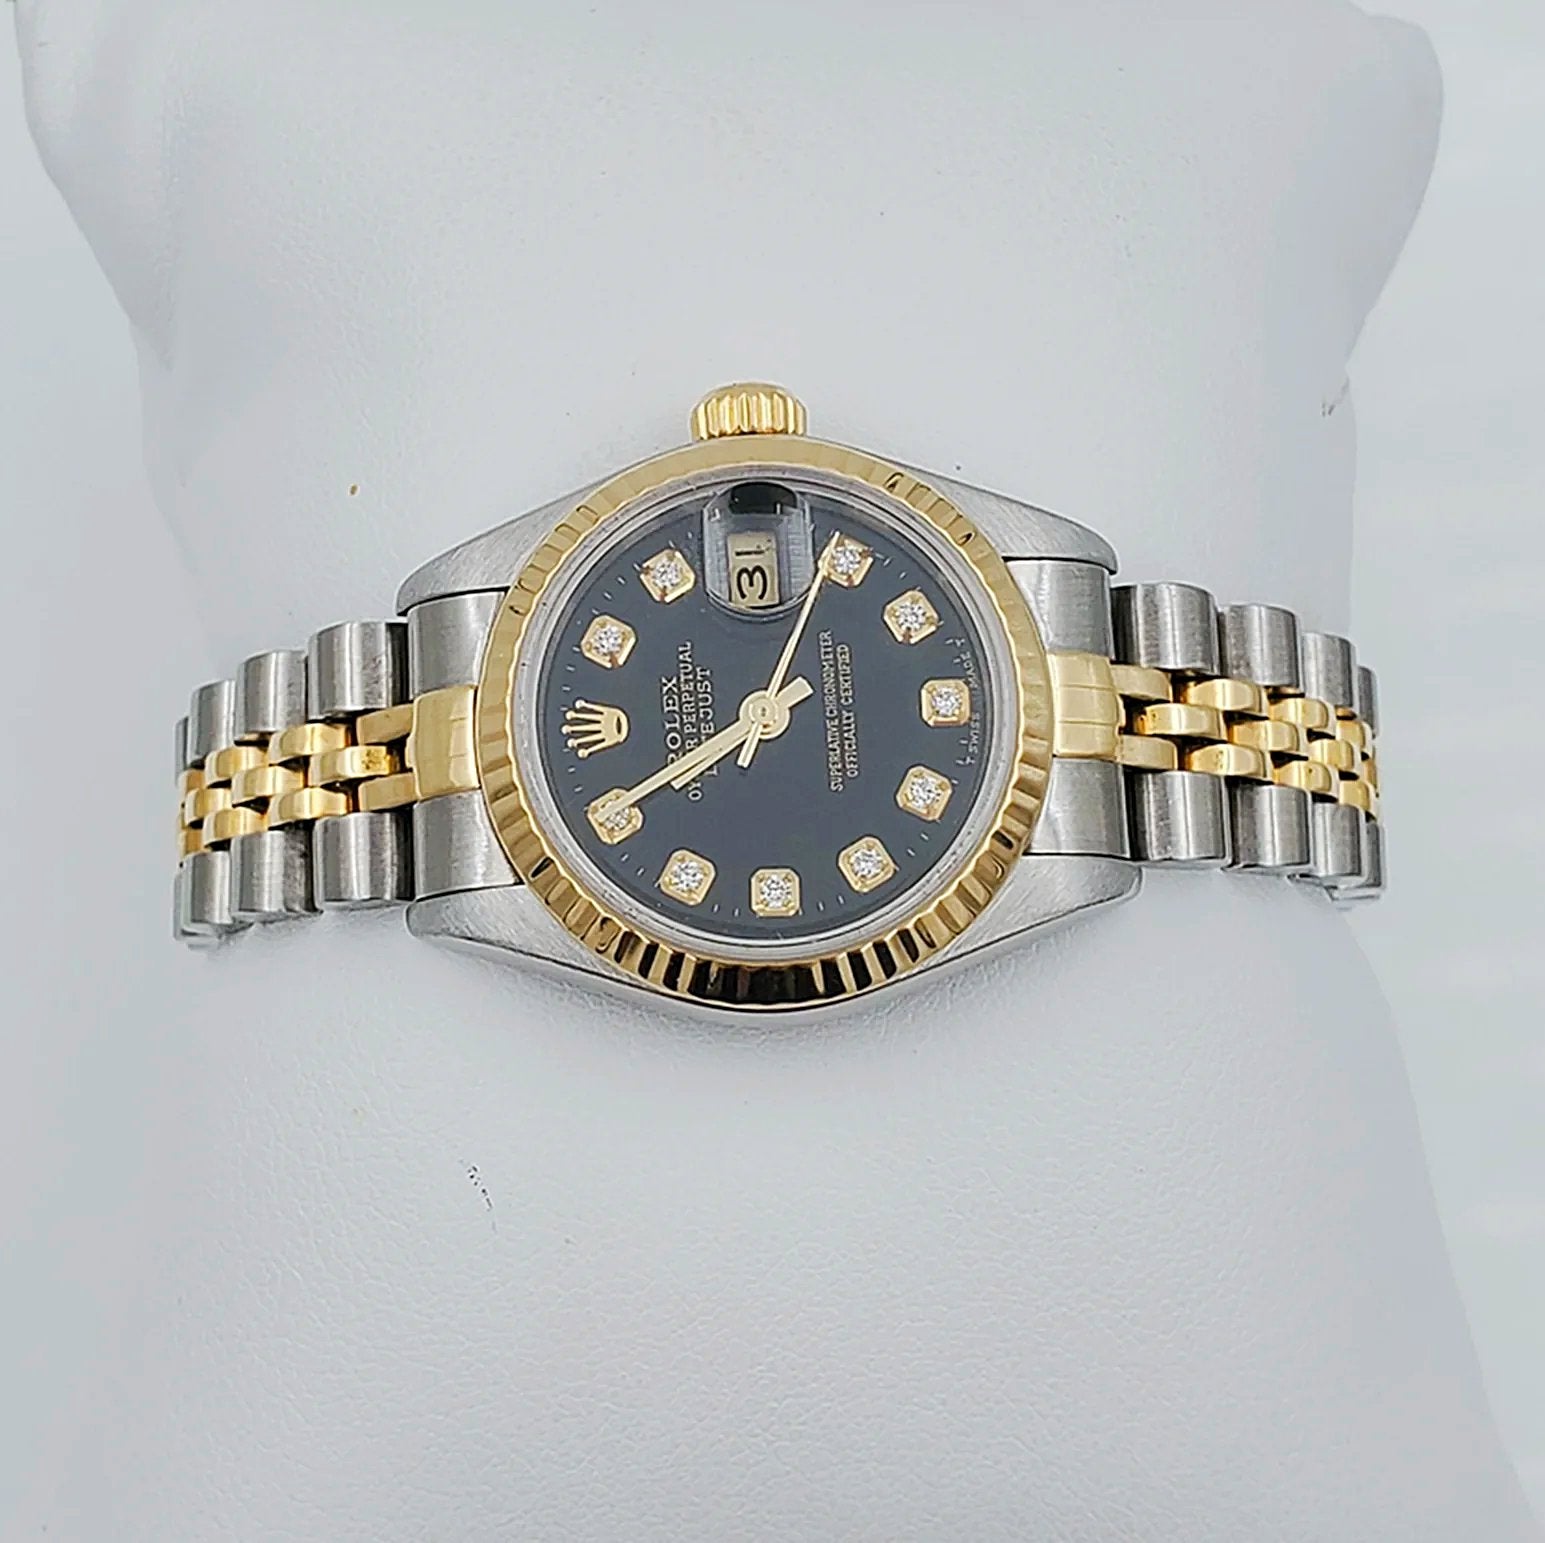 Ladies Rolex 26mm DateJust Two Tone 18K Yellow Gold / Stainless Steel Watch with Black Diamond Dial and Fluted Bezel. (Pre-Owned)